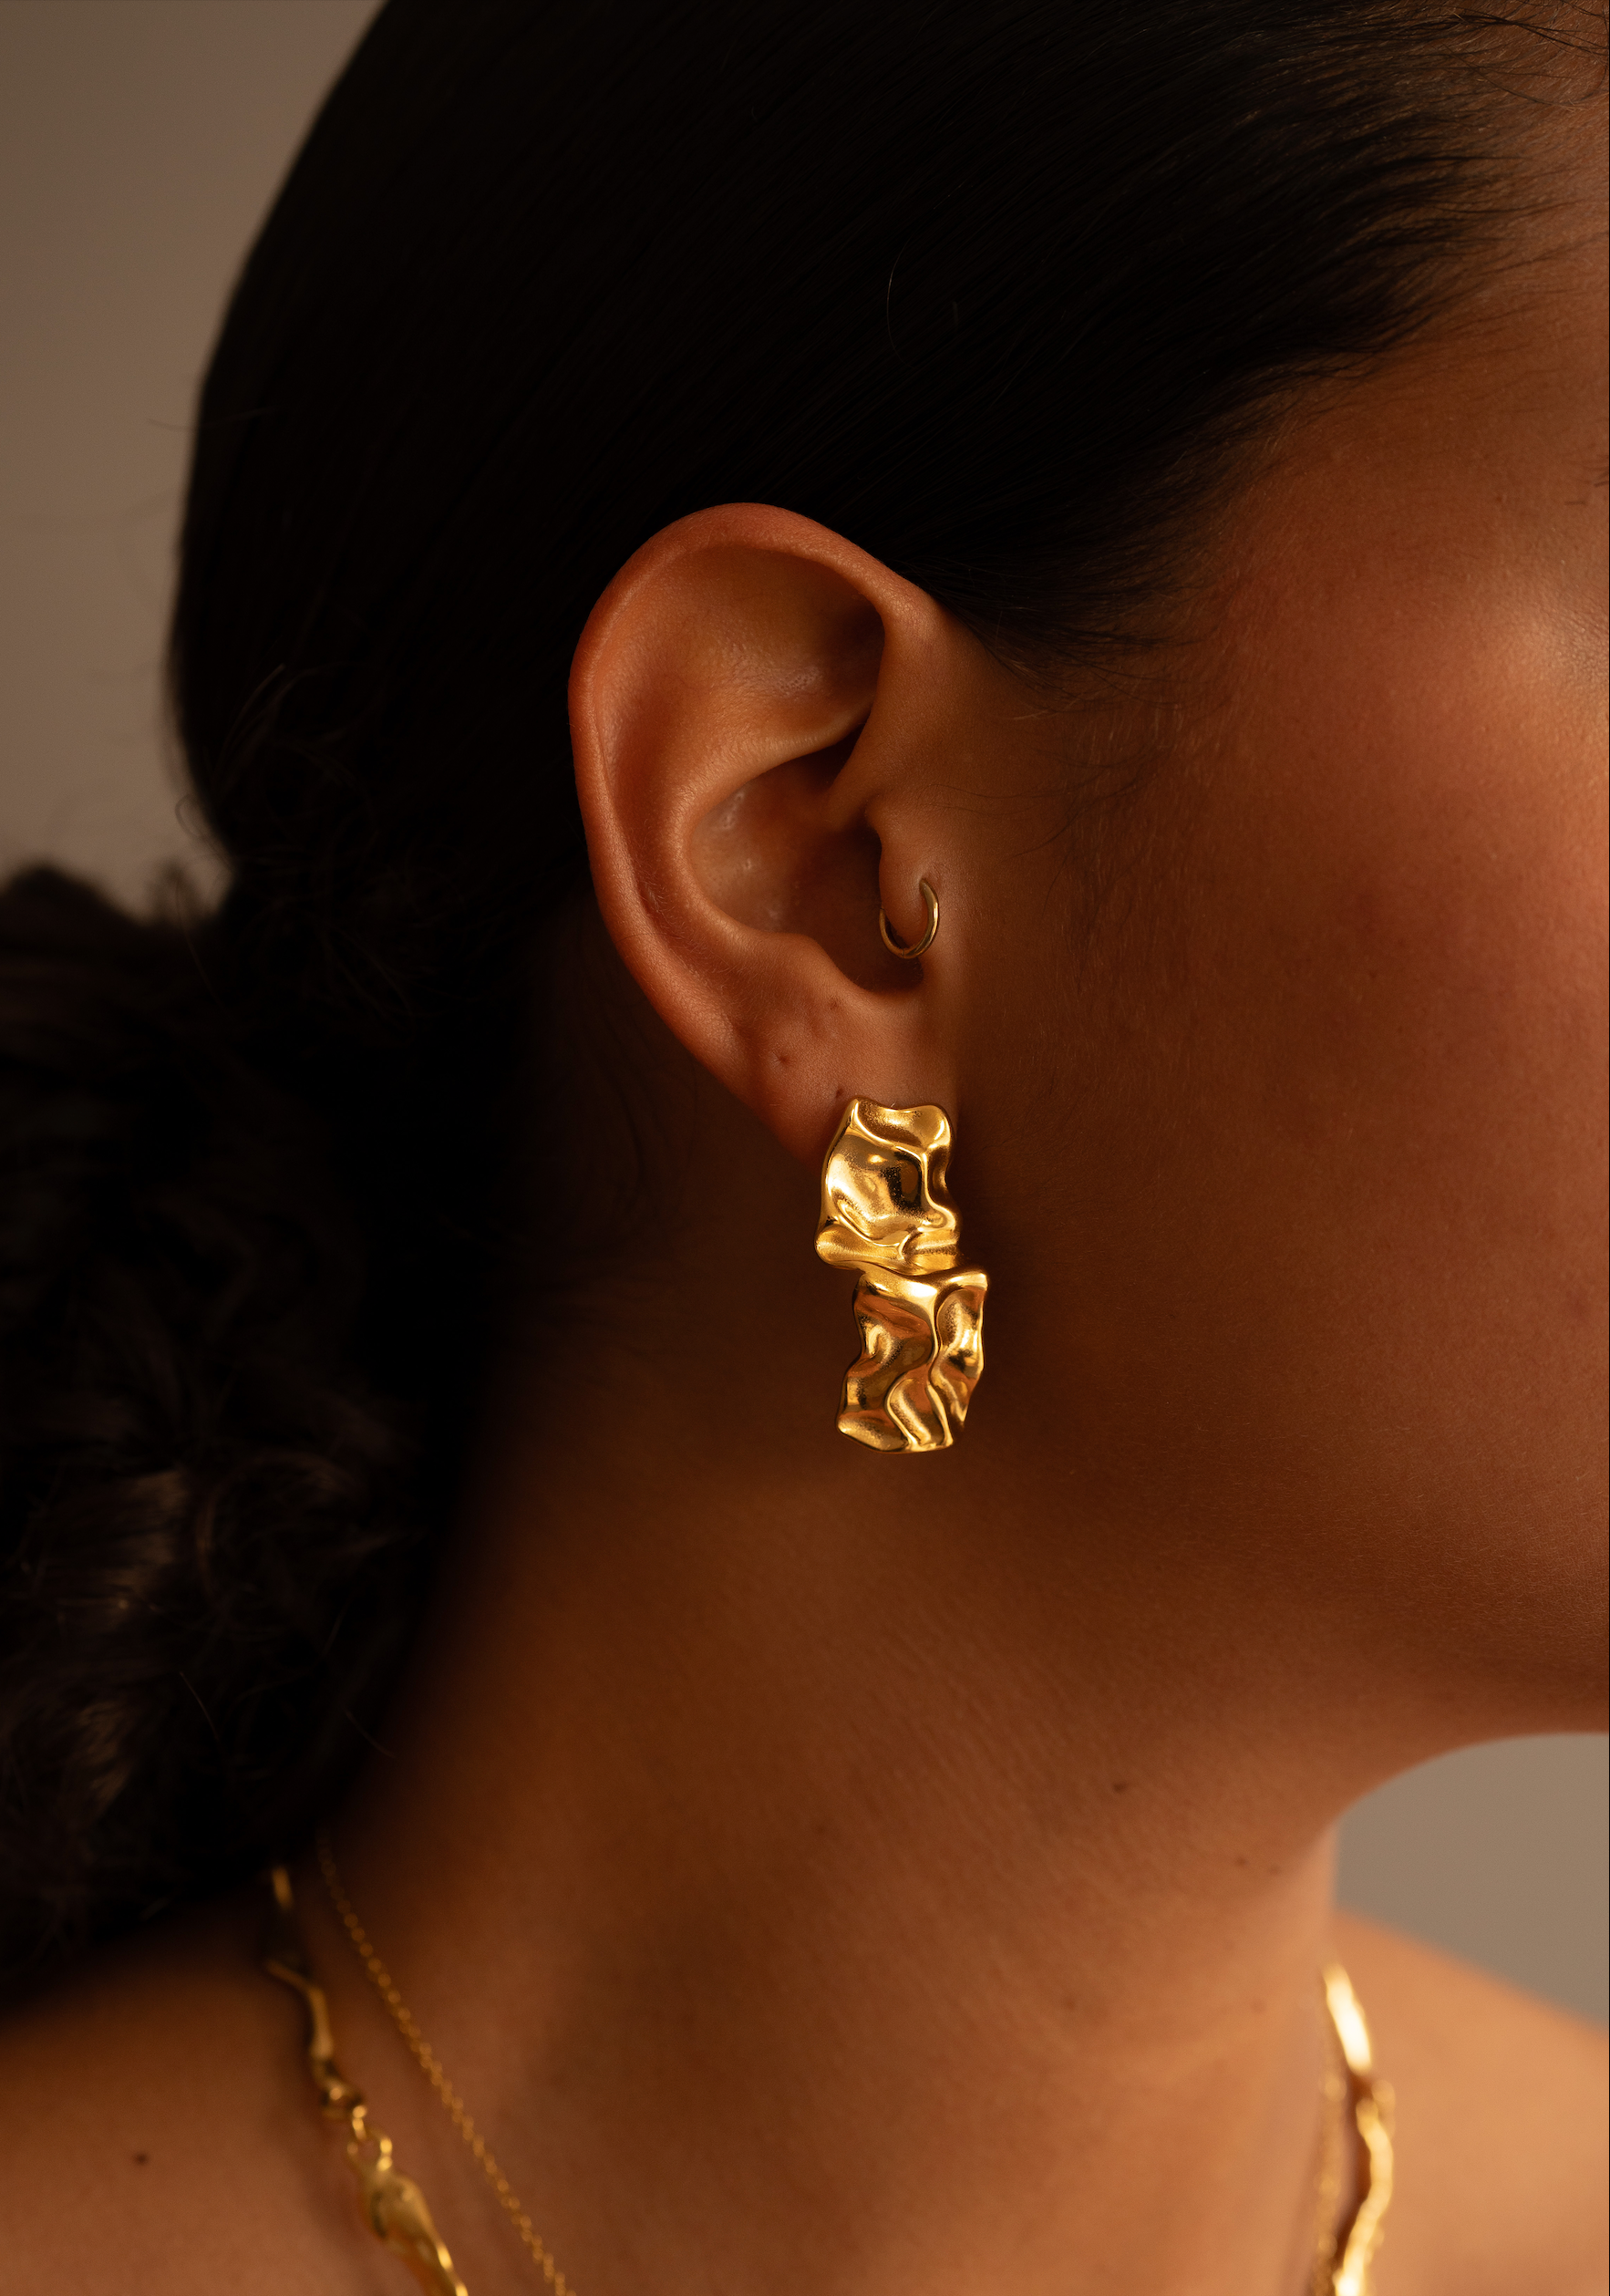 Sakura Statement Irregular Gold Earrings, a product by By Majime 